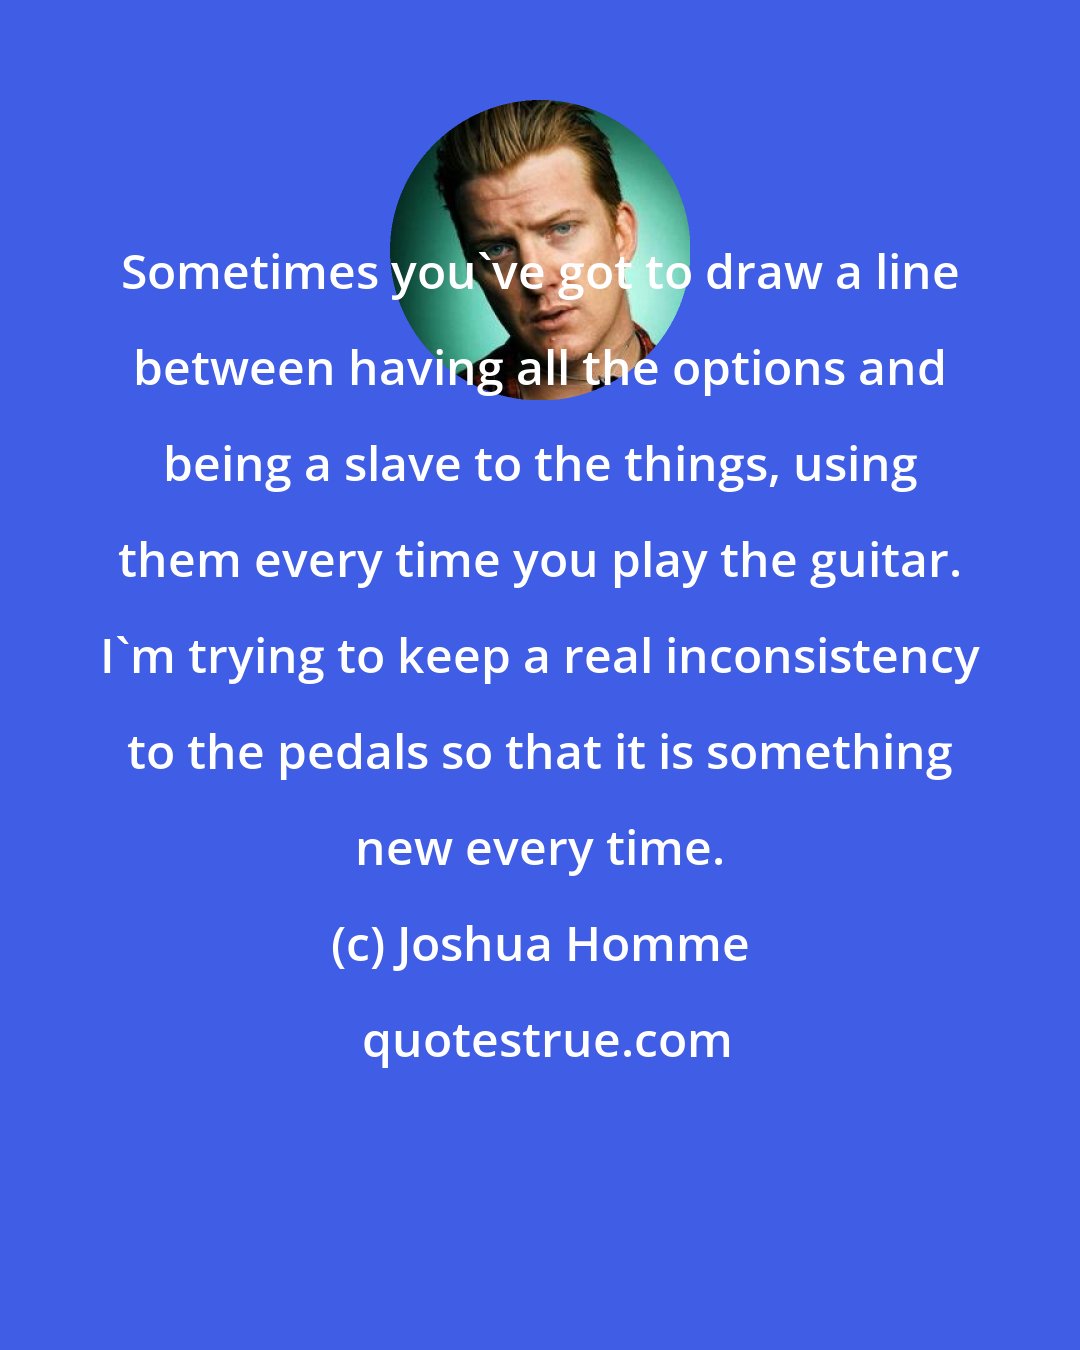 Joshua Homme: Sometimes you've got to draw a line between having all the options and being a slave to the things, using them every time you play the guitar. I'm trying to keep a real inconsistency to the pedals so that it is something new every time.